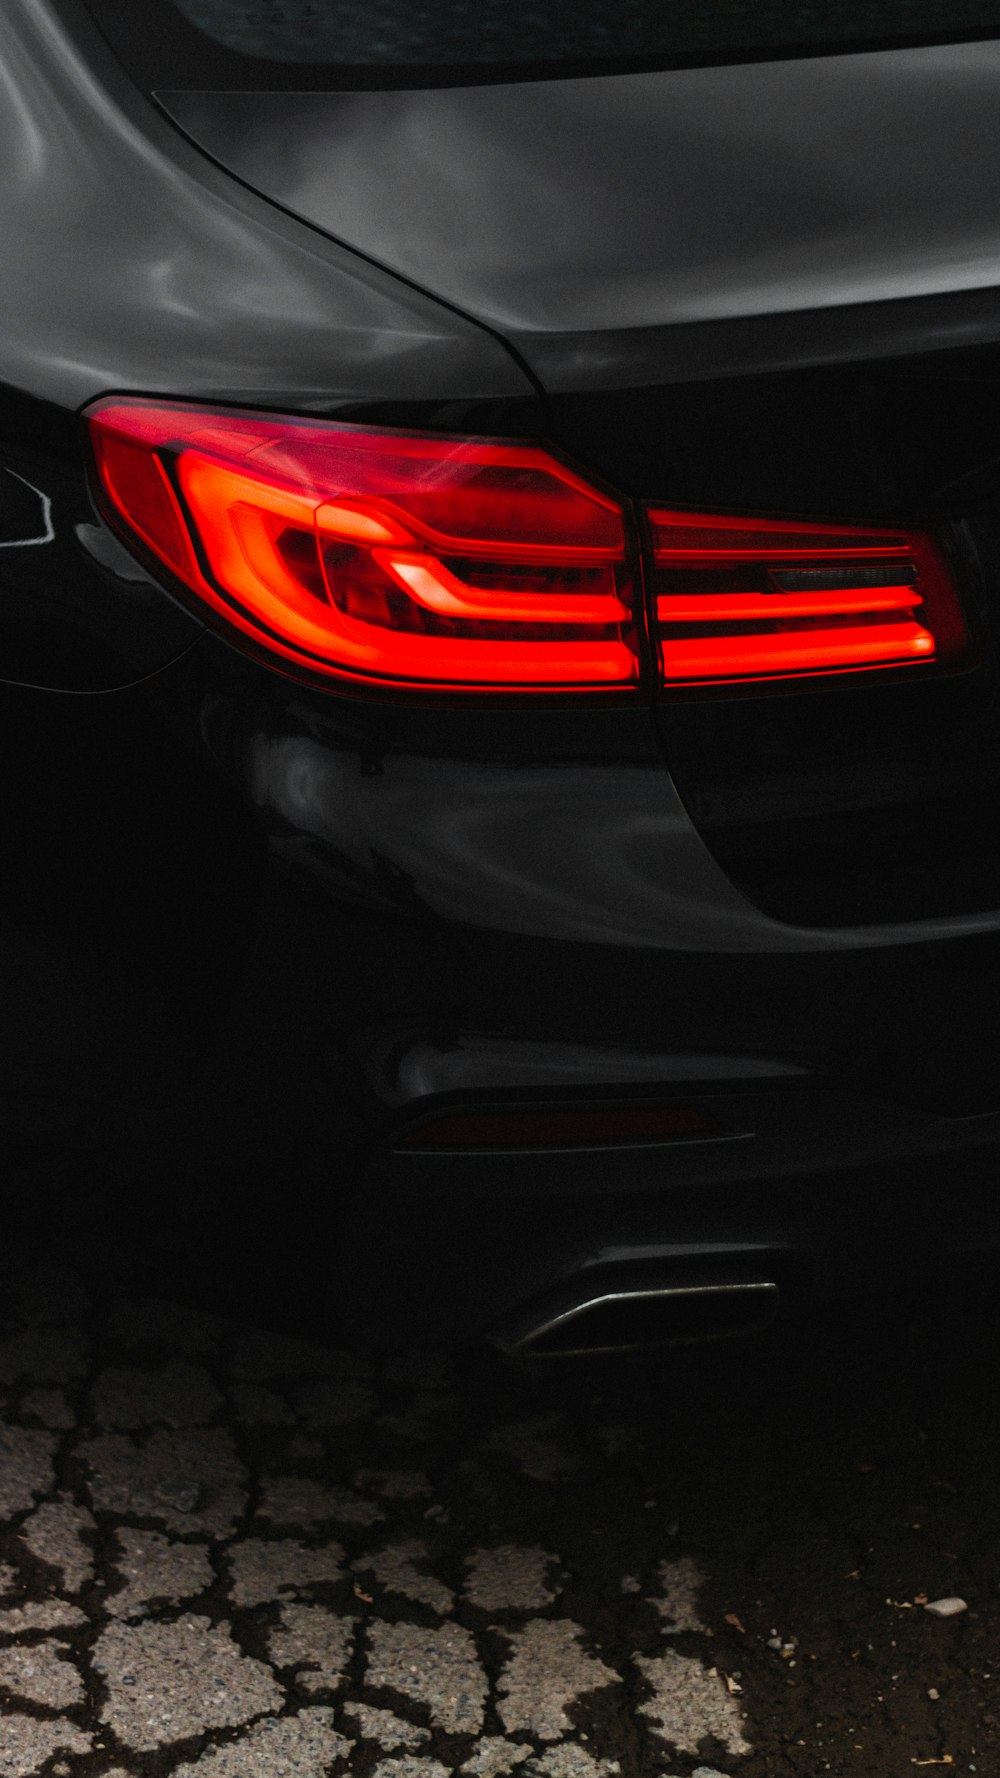 a close up of the tail light of a black car